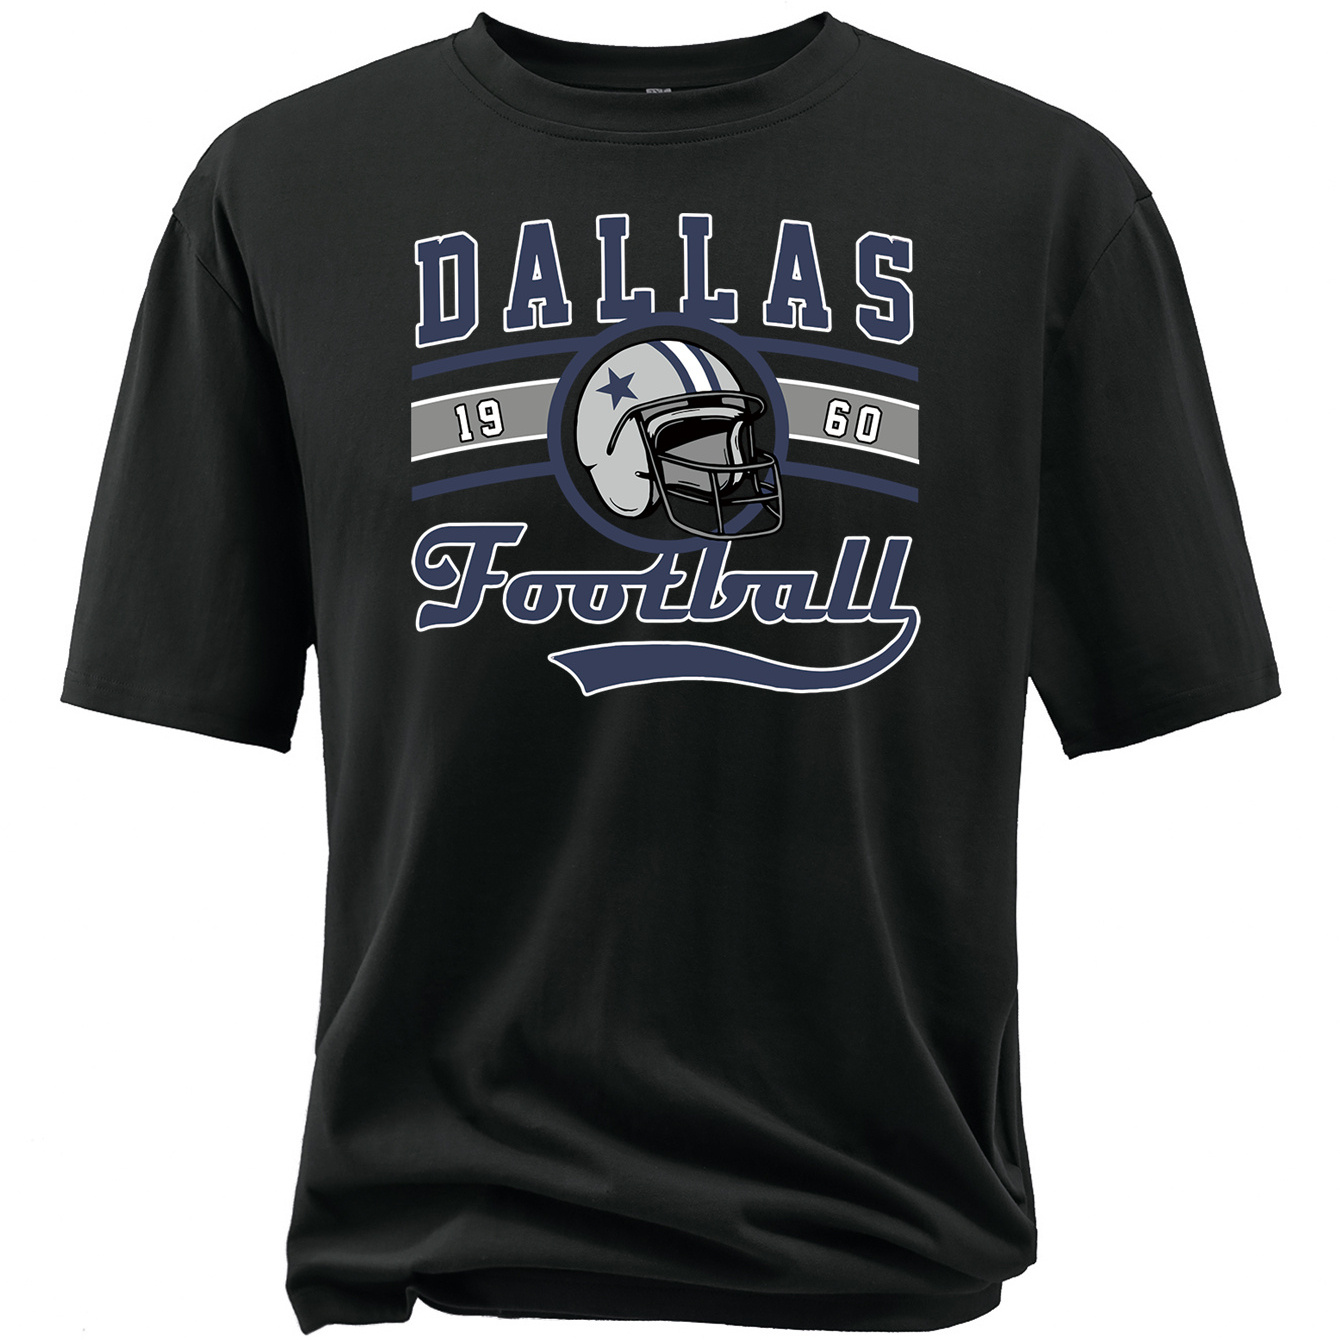 

Dallas 1960 Football Print Plus Size Men's T-shirt, Athletic Casual Breathable Outdoor Comfy Tees, Big & Tall Guys